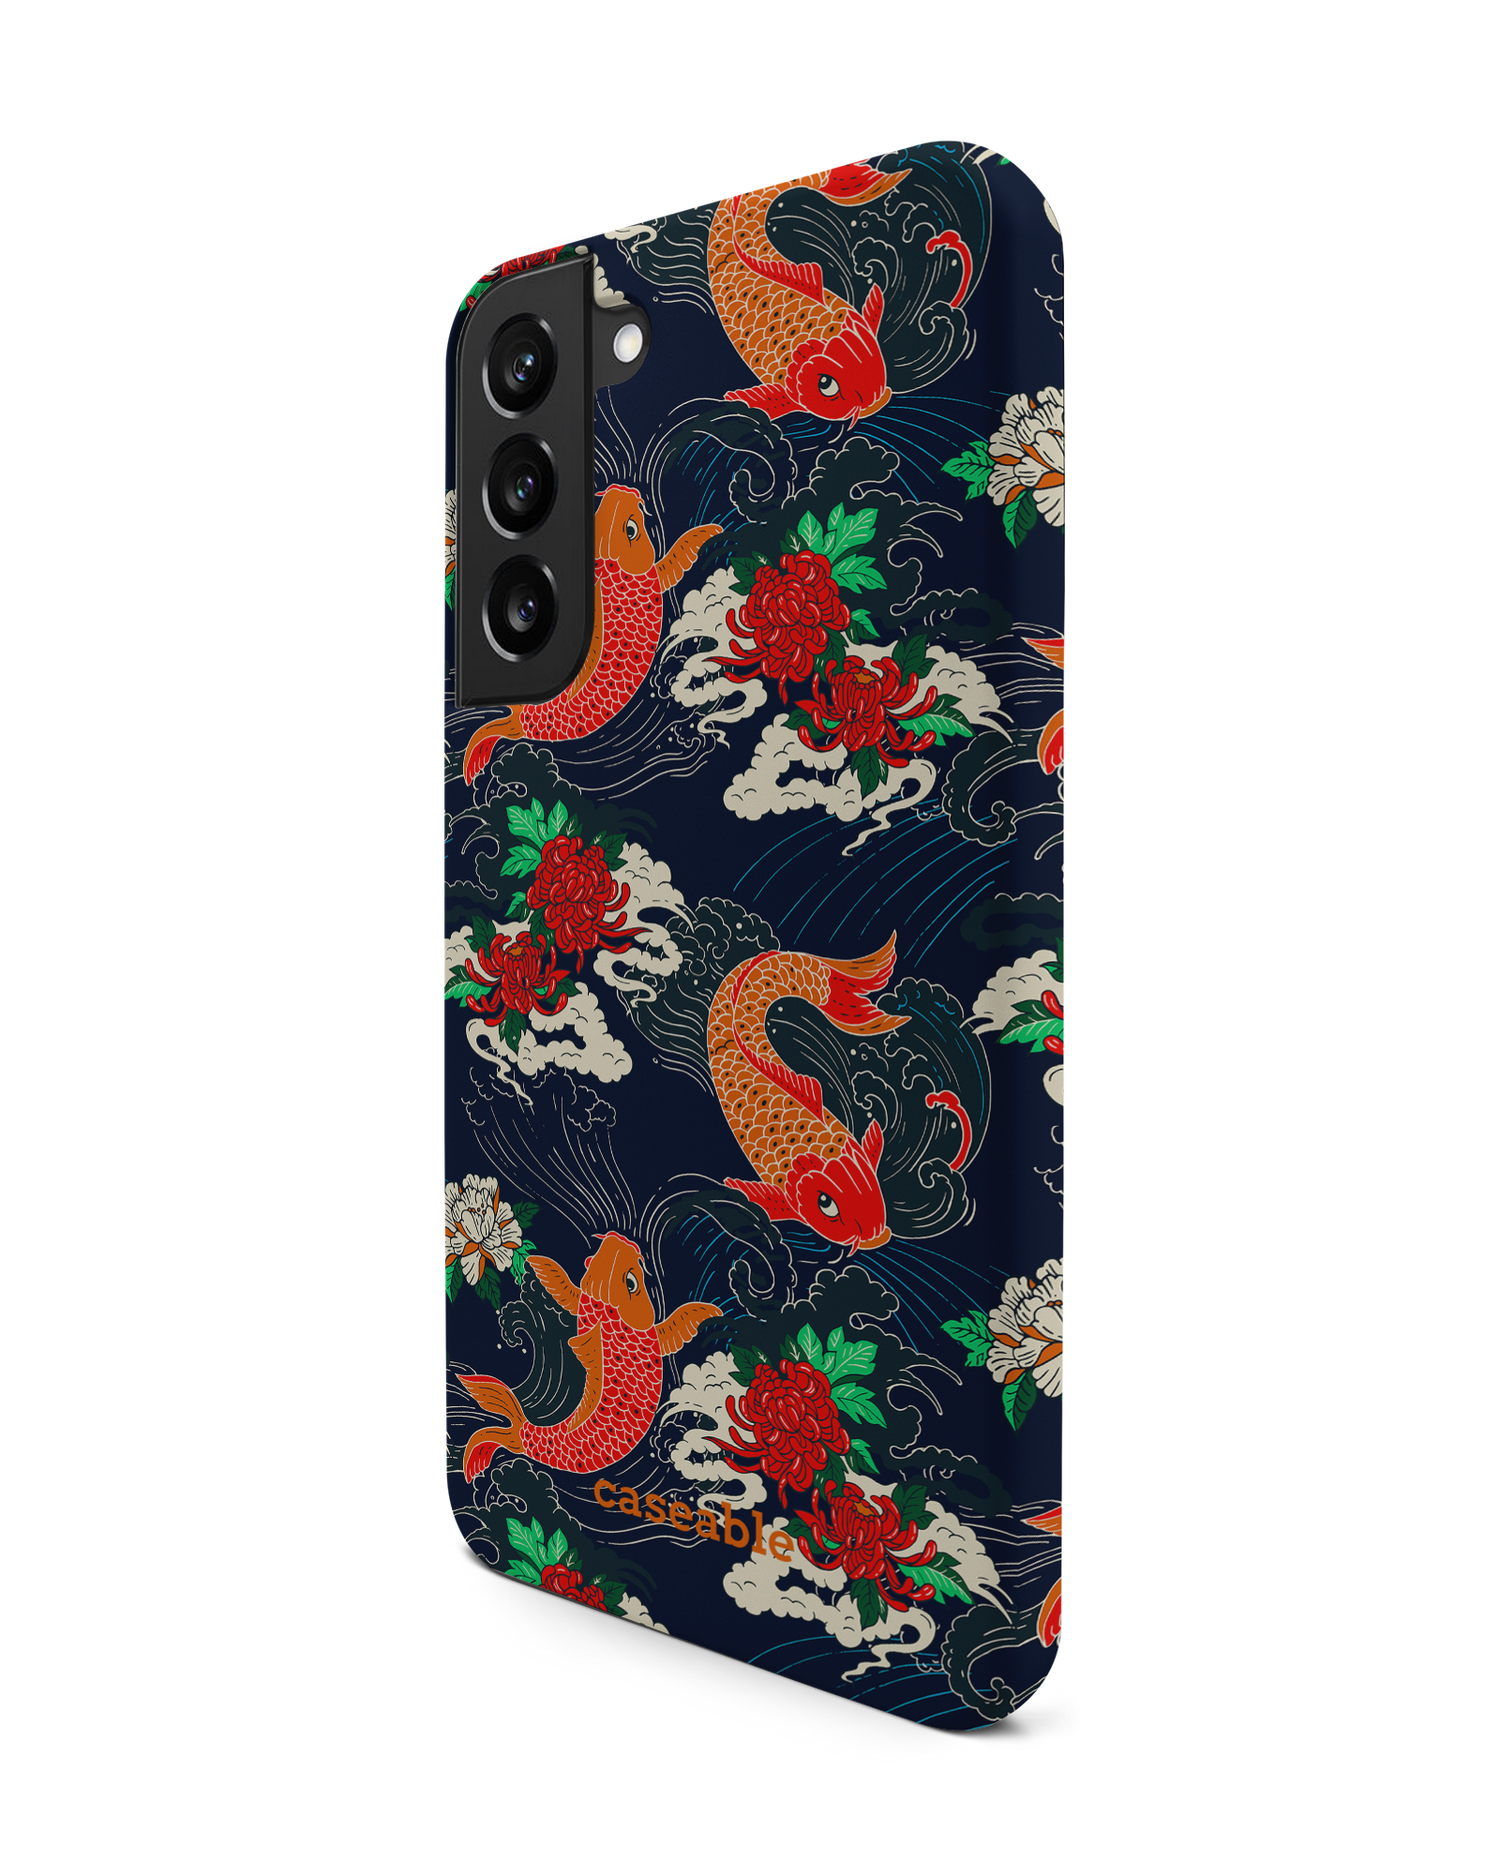 Repeating Koi Premium Phone Case Samsung Galaxy S22 Plus 5G: View from the right side